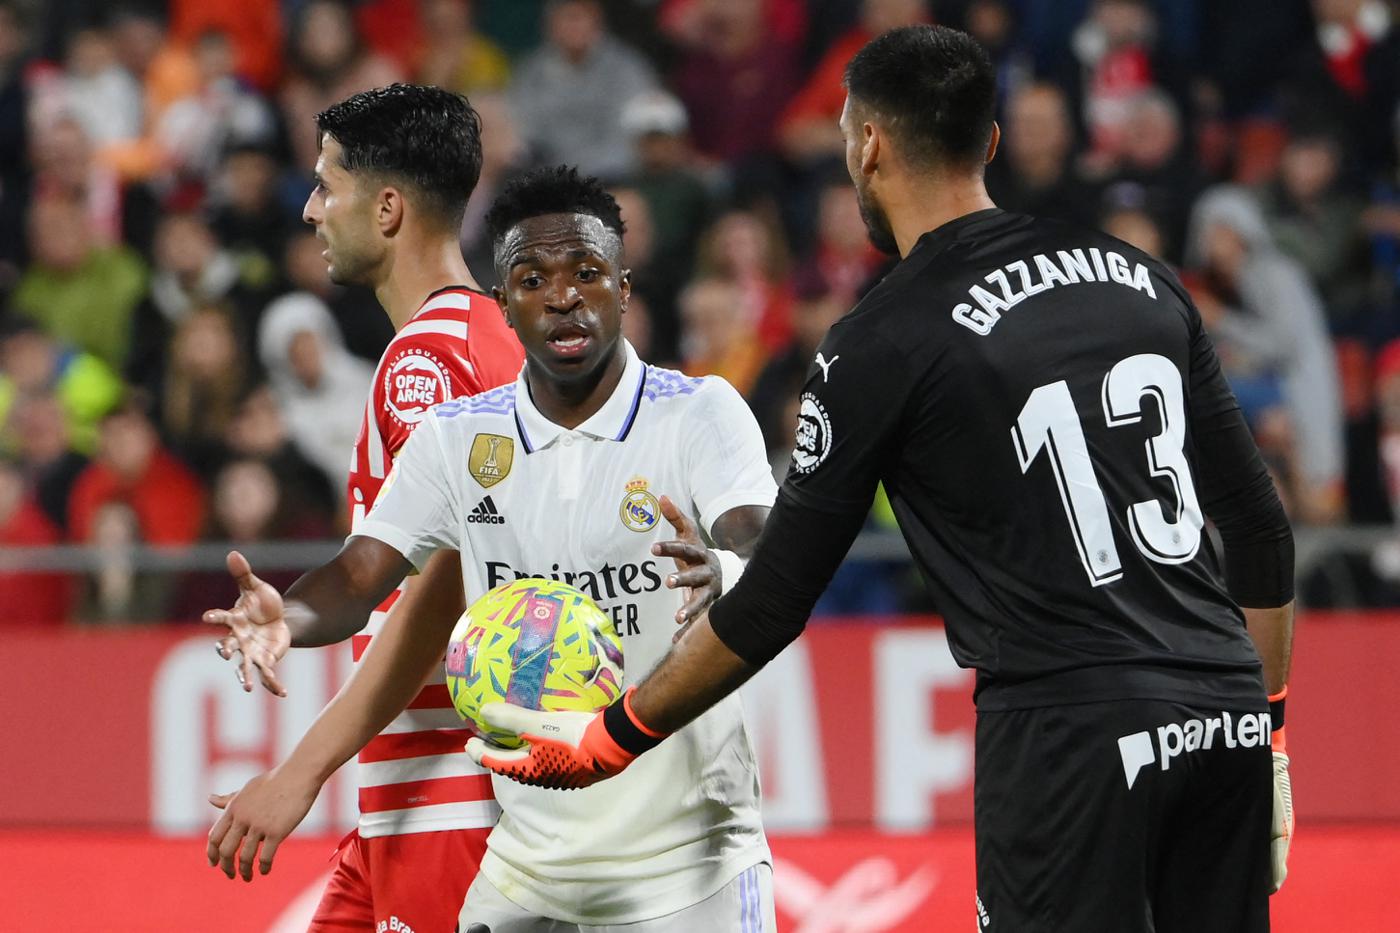 Girona - Real - 4:2. Spain Championship, round 31. Match Review, Statistics